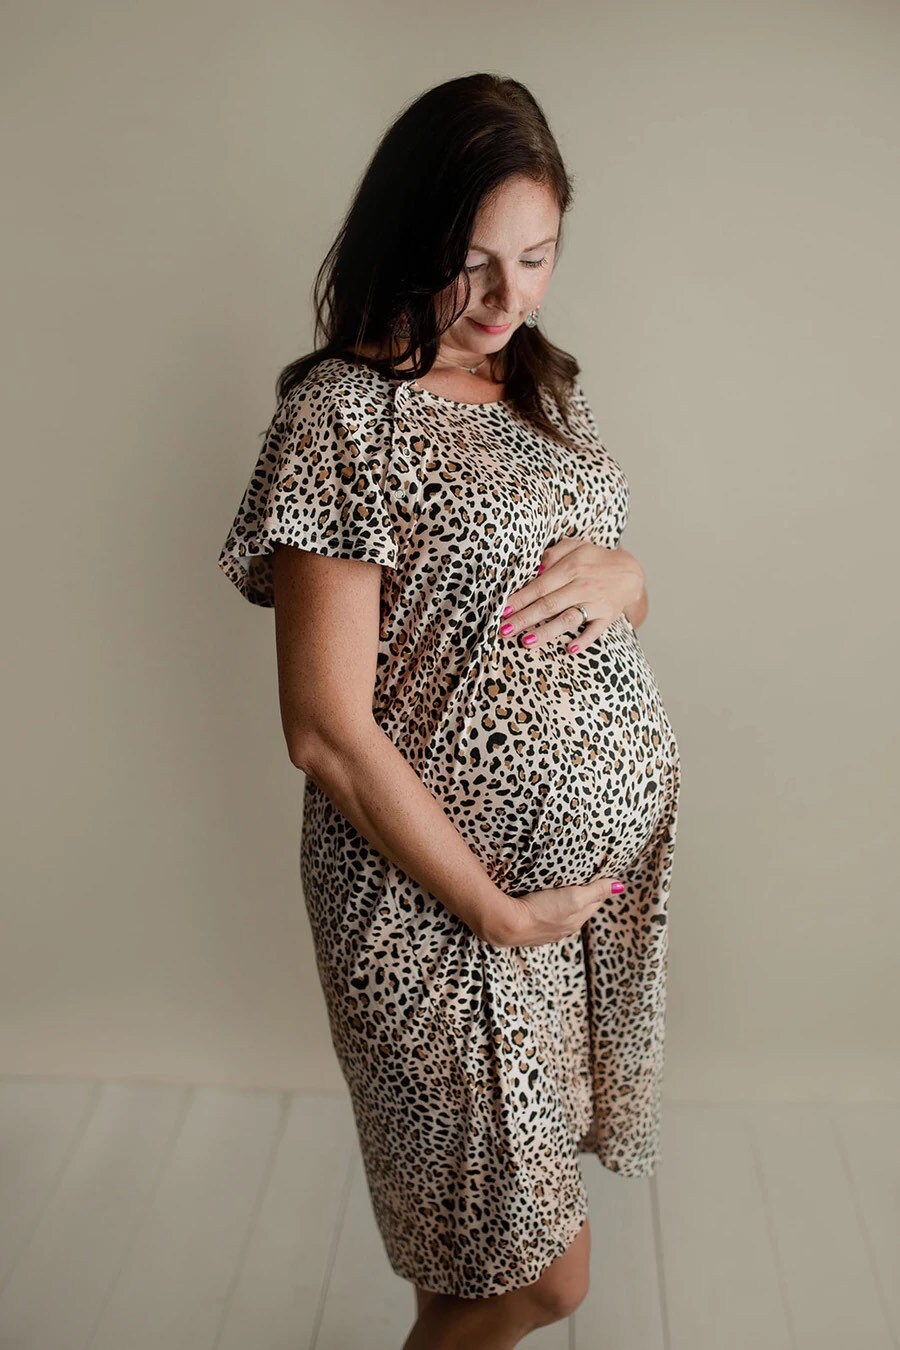 New arrival- Leopard Print Labor and Delivery/nursing gown Baby in Styles